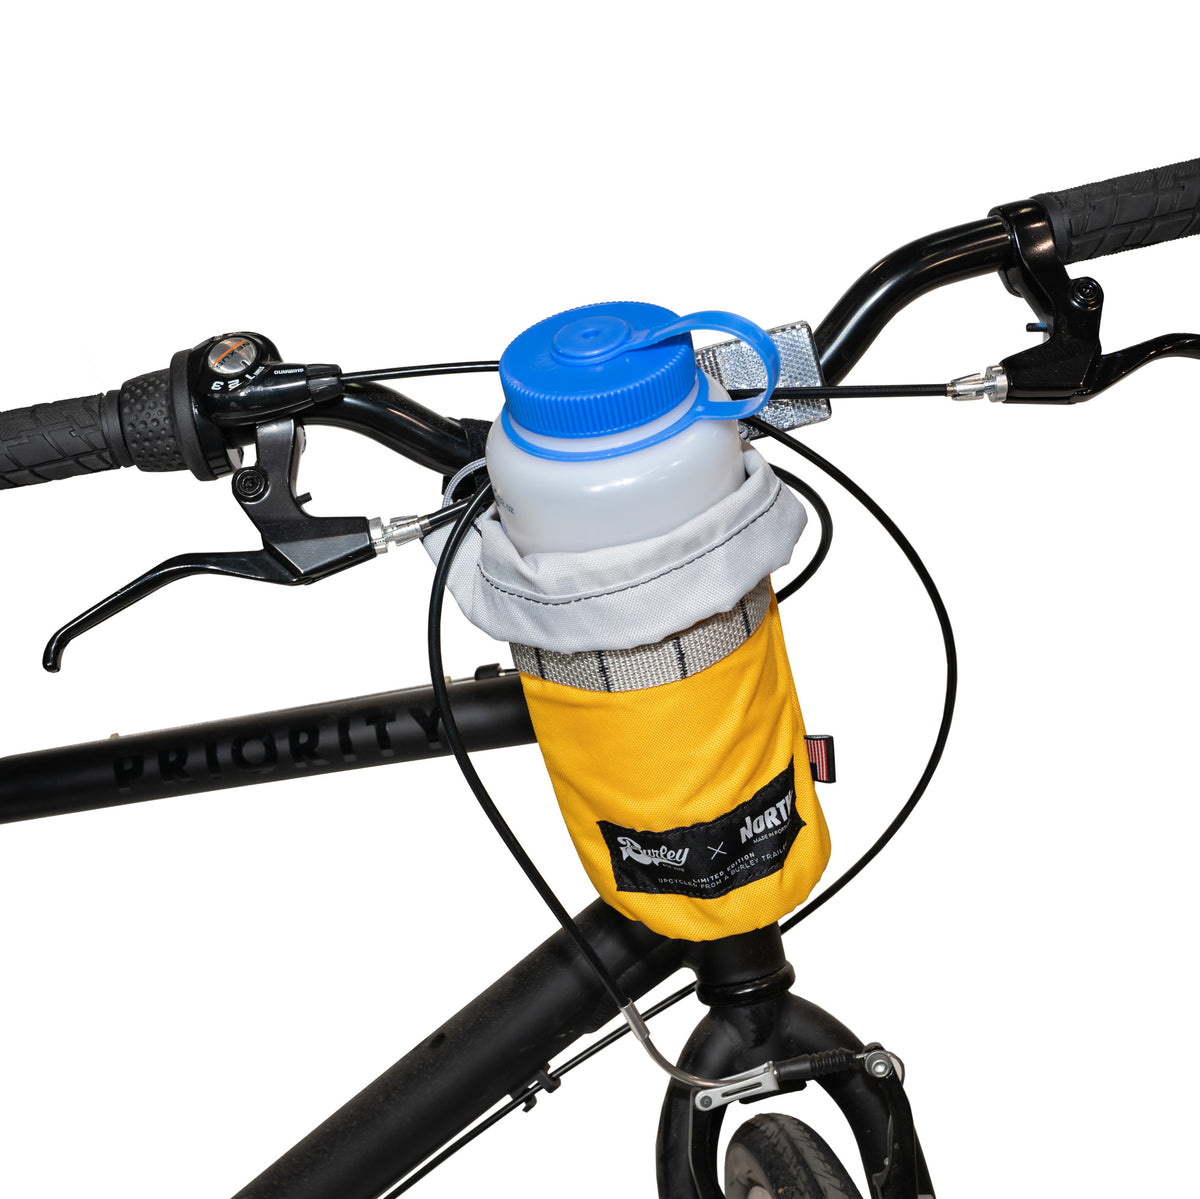 Yellow Burley Bottle Sleeve Attached To Bike